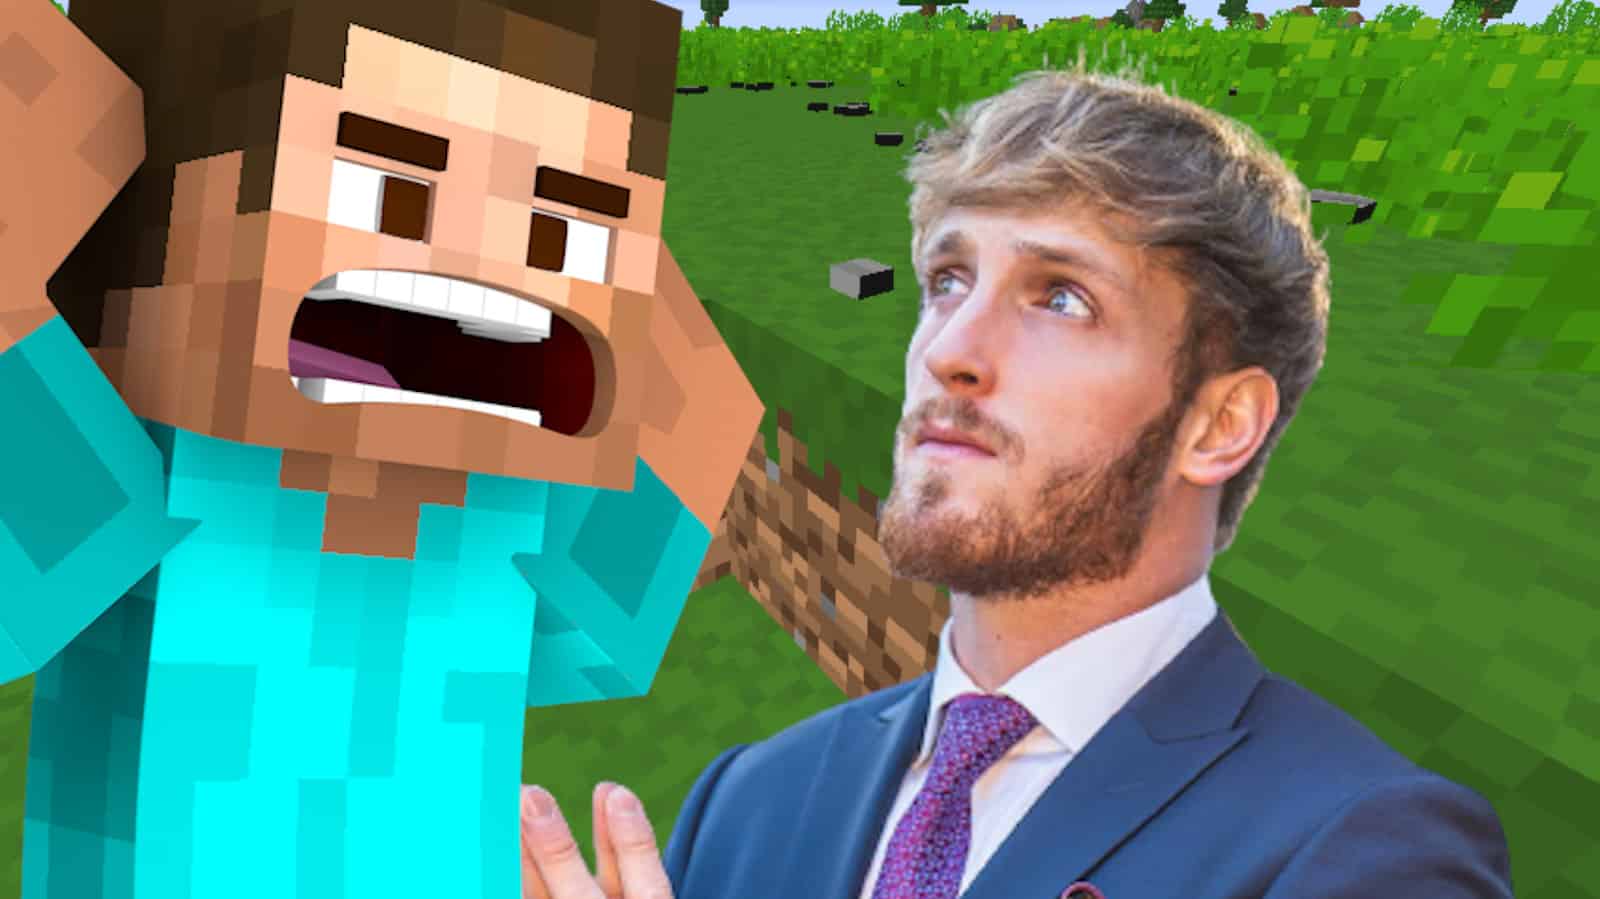 Steve confronts Logan Paul in Minecraft